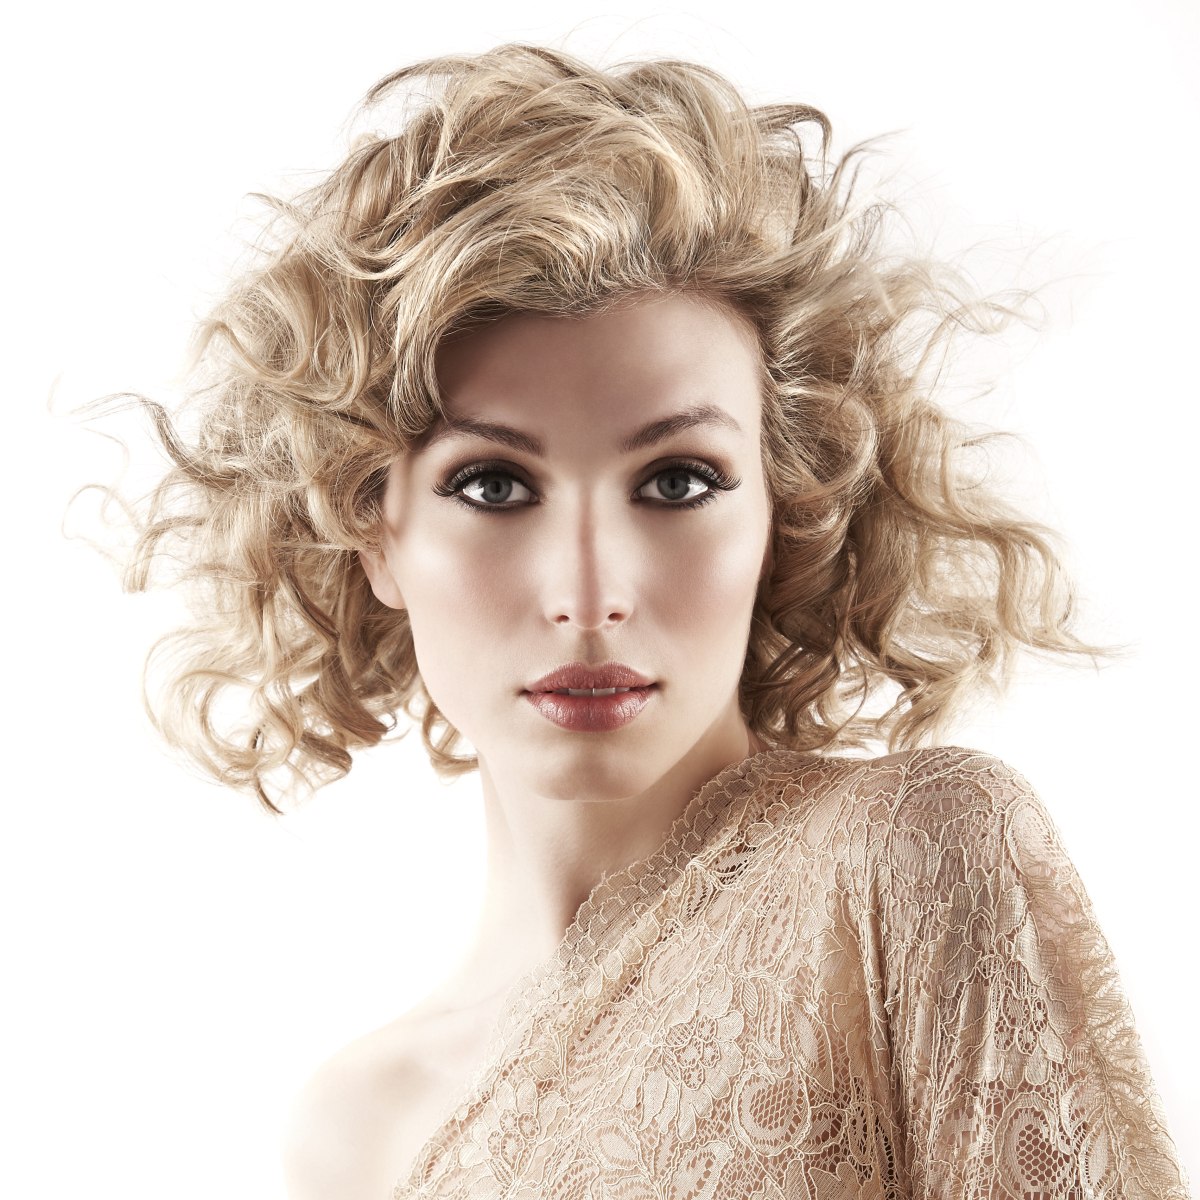 Layered Short Hairstyles for Curls - Revlon Professional